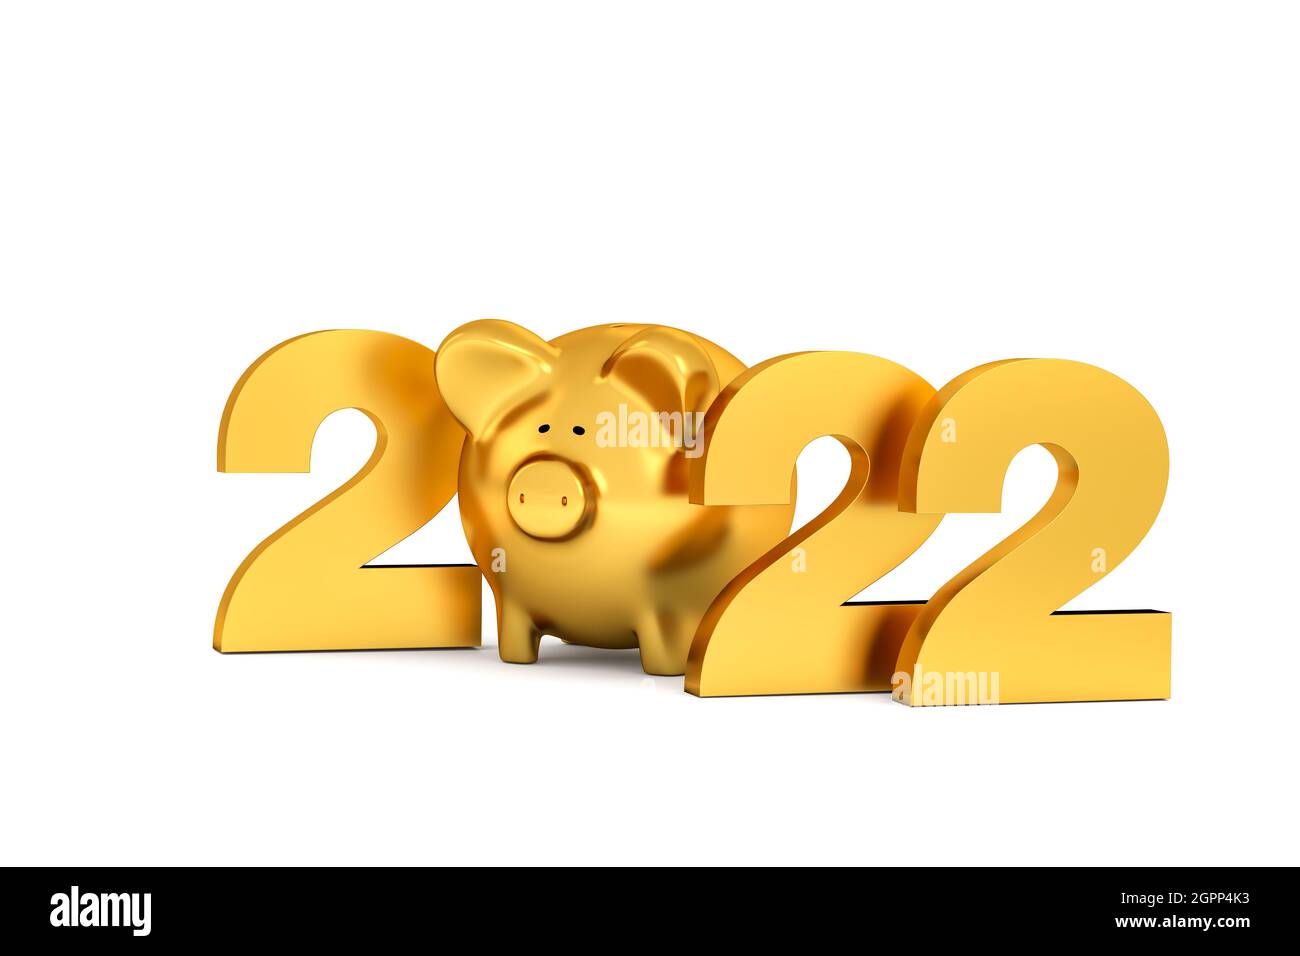 Happy New Year 2022 concept: Golden letters 2*22 and a piggybank inbetween. Isolated on white. Stock Photo